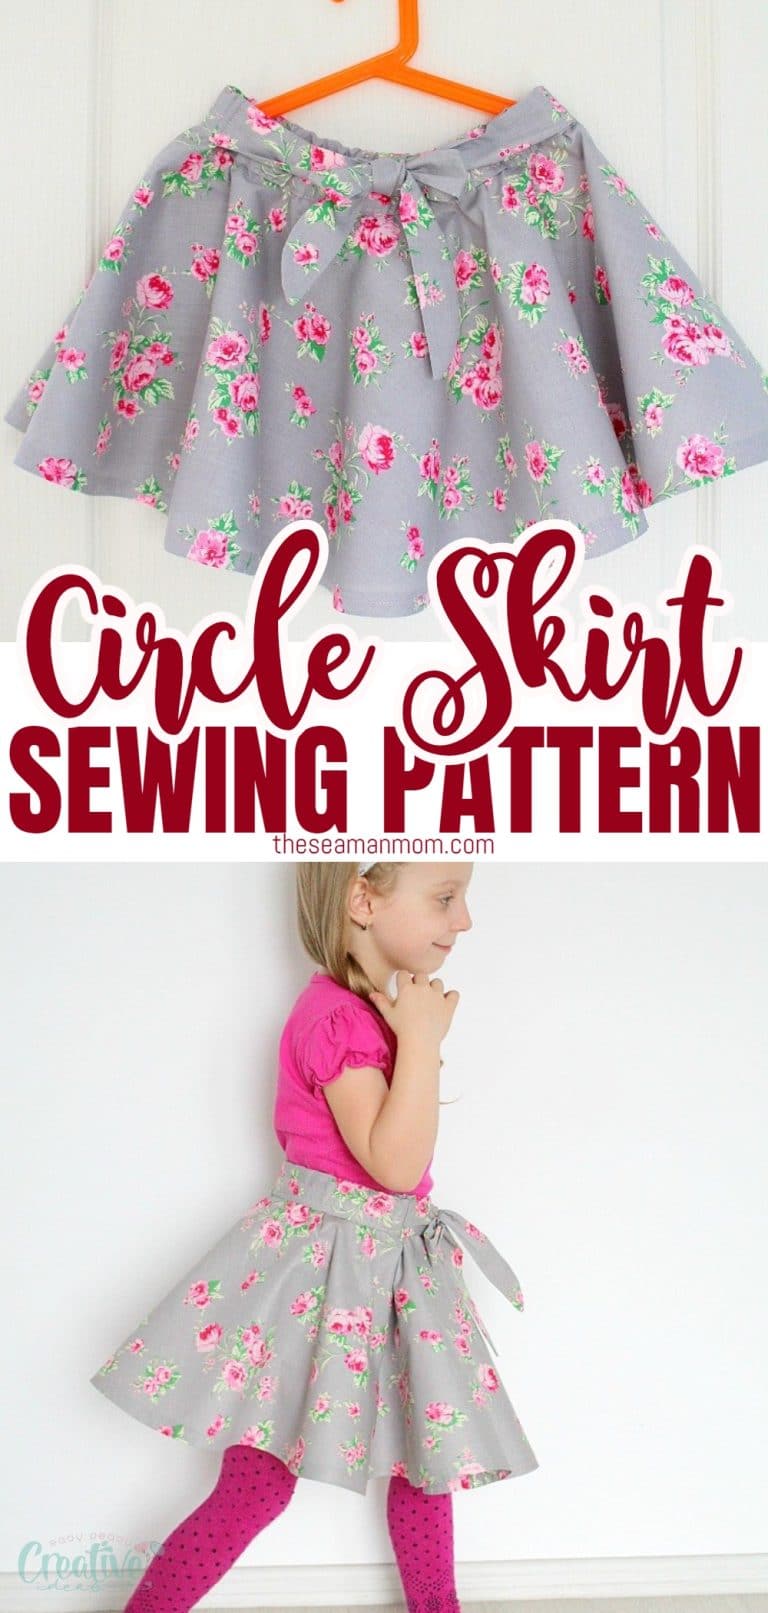 Make Your Own CIRCLE SKIRT PATTERN - Easy Peasy Creative Ideas